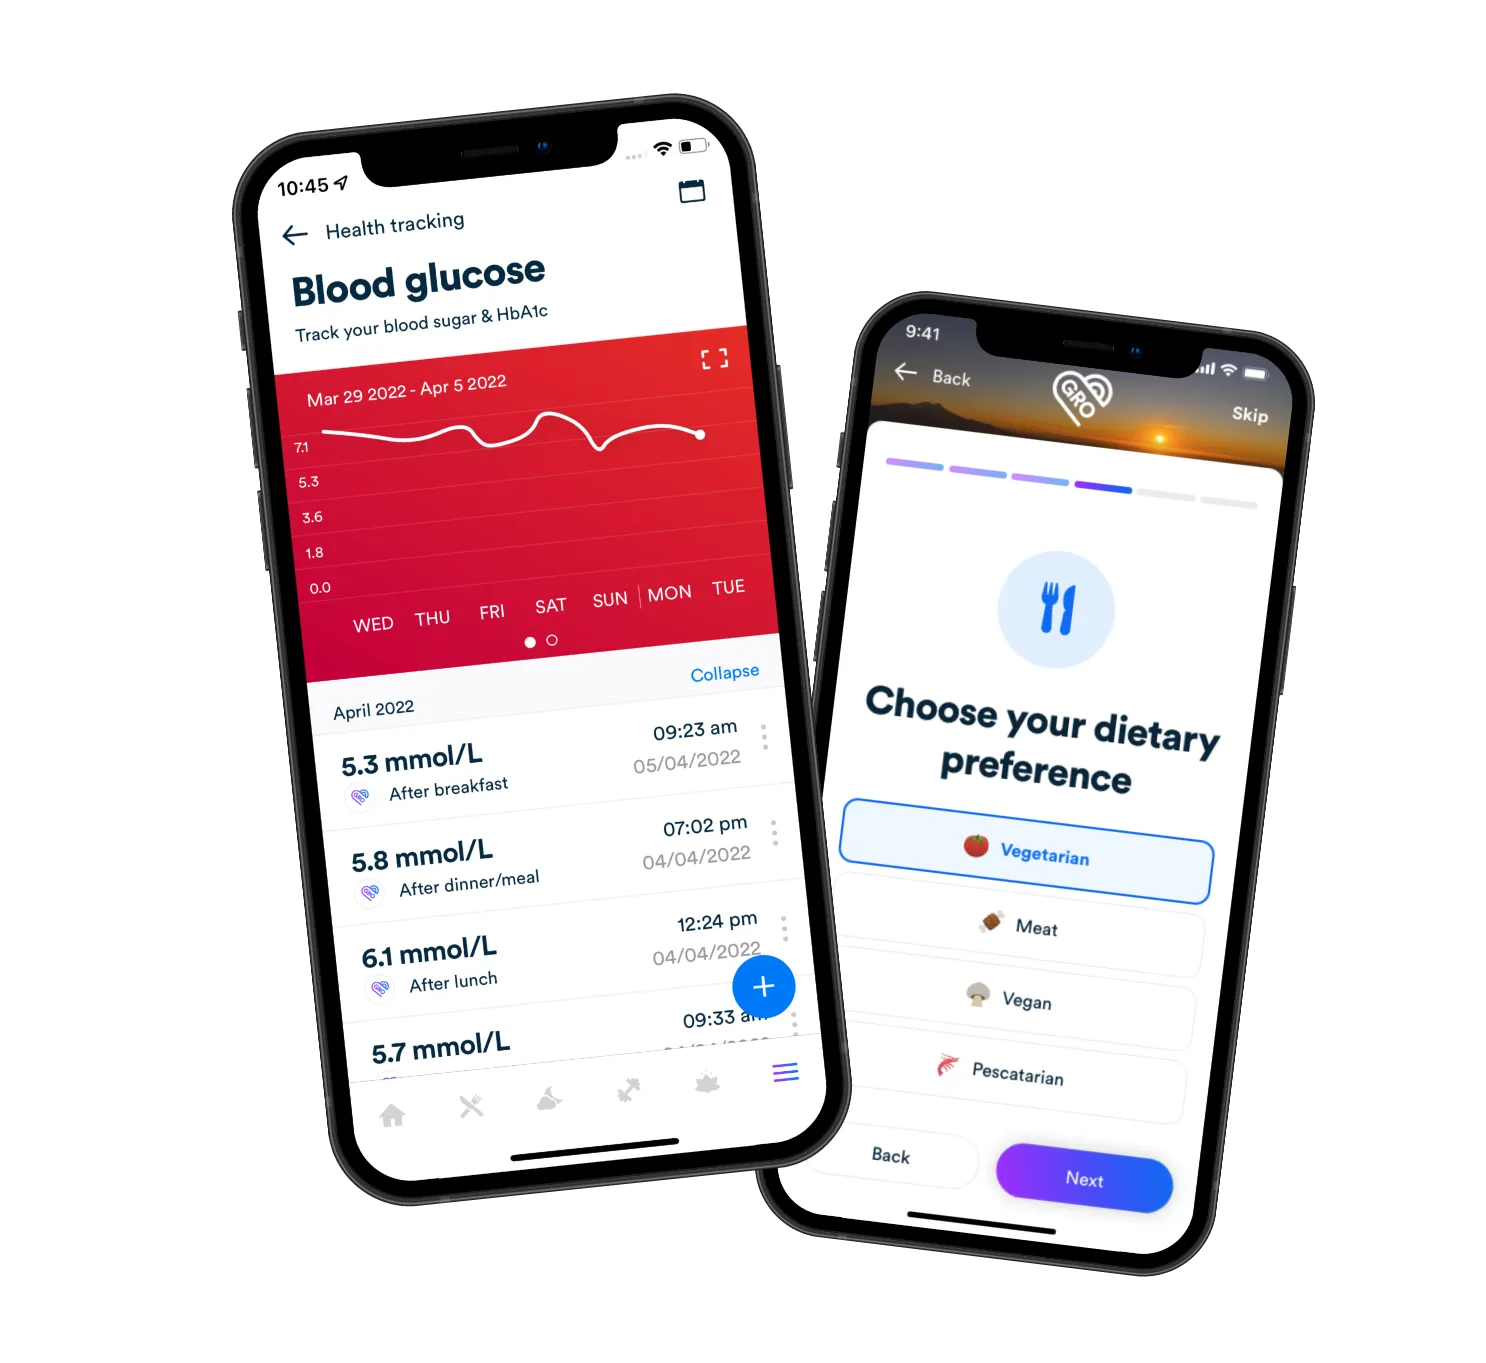 Gro Health app showing blood glucose tracking screen and dietary preference selection screen